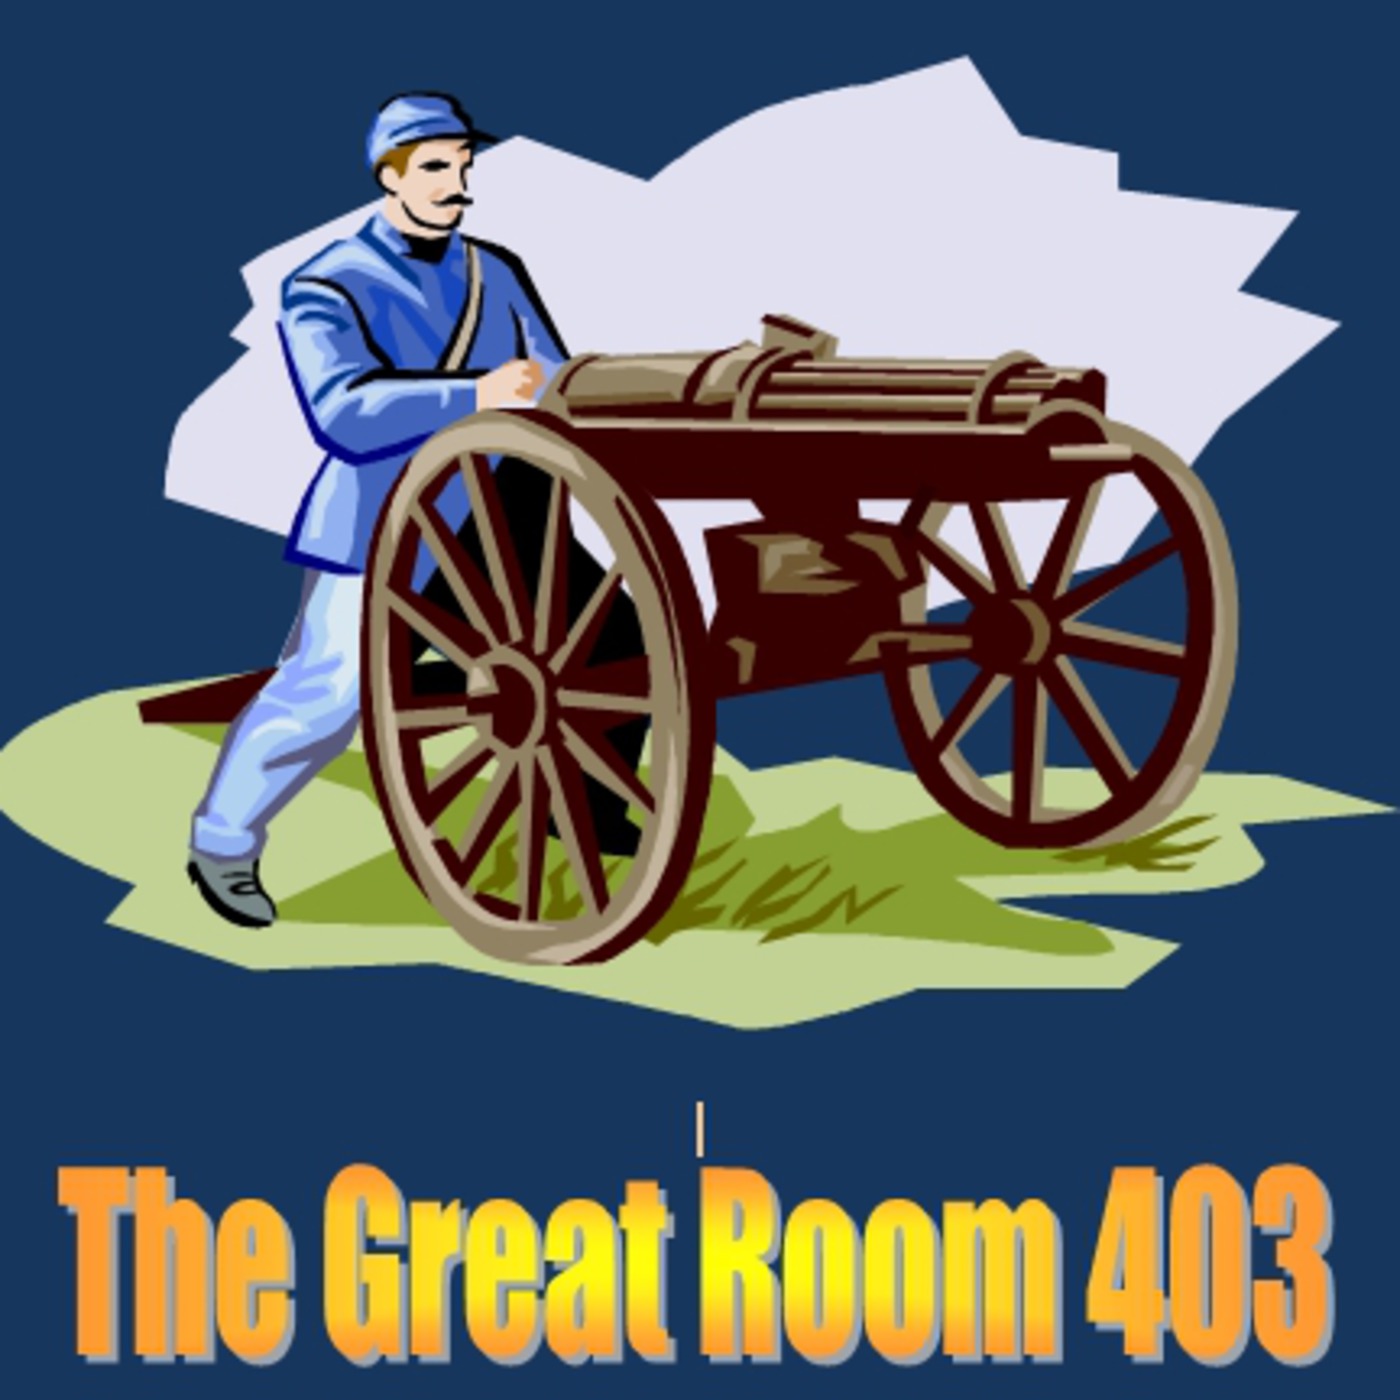 The Great Room 403: The Civil War